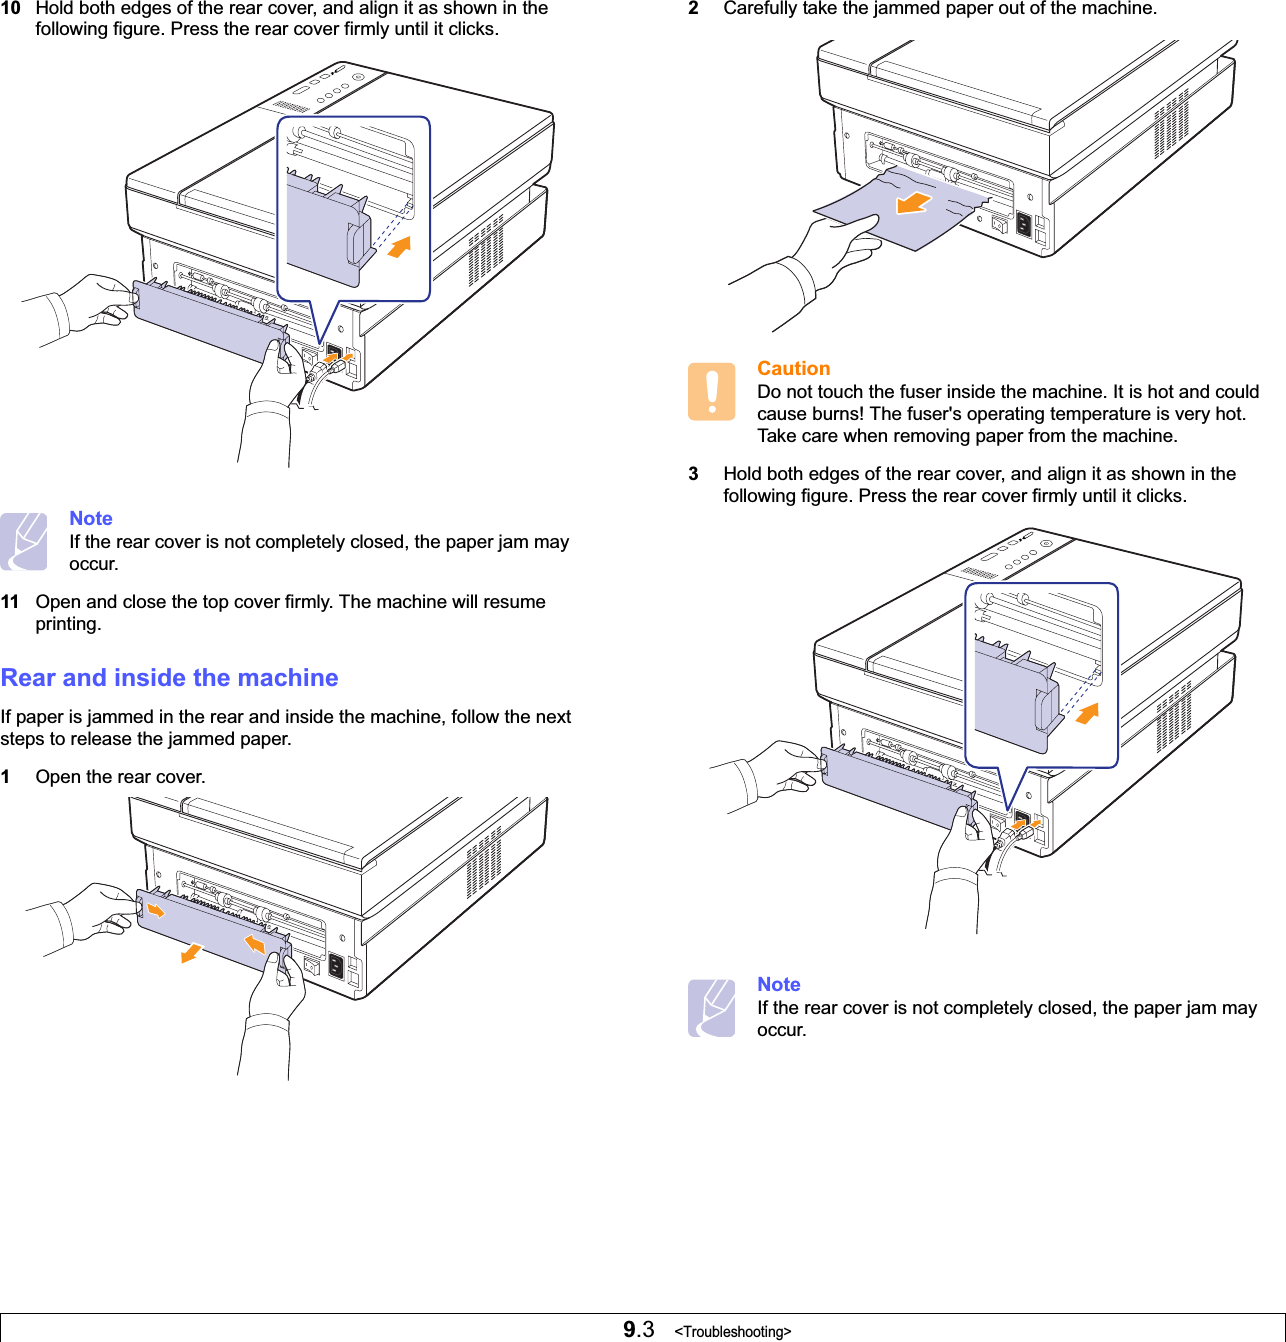 9.3   &lt;Troubleshooting&gt;10 Hold both edges of the rear cover, and align it as shown in the following figure. Press the rear cover firmly until it clicks. NoteIf the rear cover is not completely closed, the paper jam may occur.11 Open and close the top cover firmly. The machine will resume printing. Rear and inside the machineIf paper is jammed in the rear and inside the machine, follow the next steps to release the jammed paper.1Open the rear cover.2Carefully take the jammed paper out of the machine. CautionDo not touch the fuser inside the machine. It is hot and could cause burns! The fuser&apos;s operating temperature is very hot. Take care when removing paper from the machine.3Hold both edges of the rear cover, and align it as shown in the following figure. Press the rear cover firmly until it clicks. NoteIf the rear cover is not completely closed, the paper jam may occur.